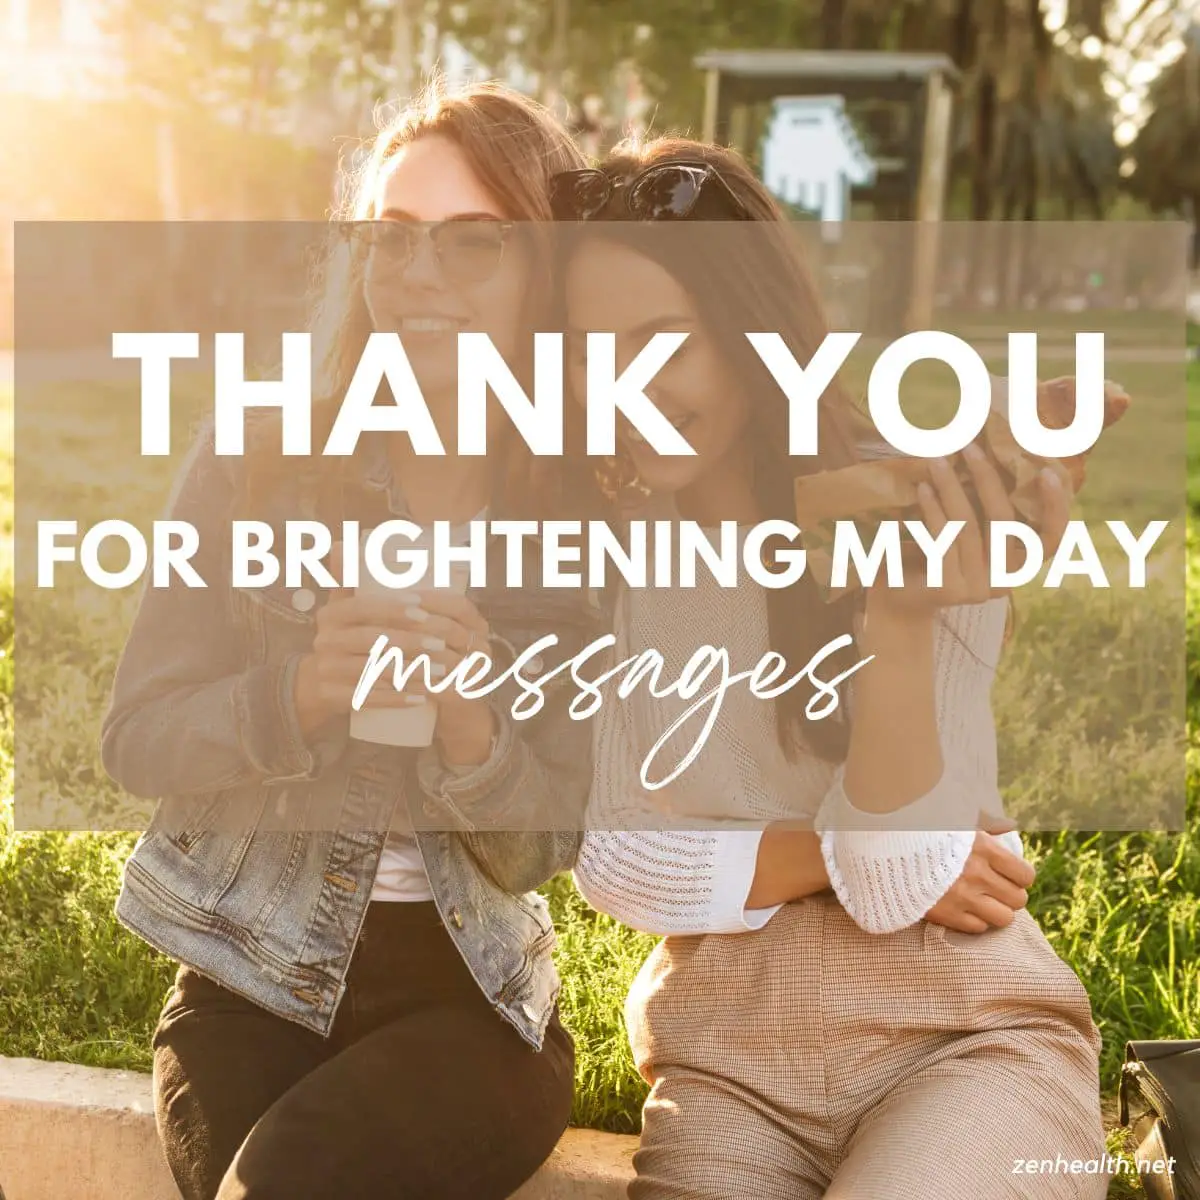 28 Thank You for Brightening My Day Messages to Send